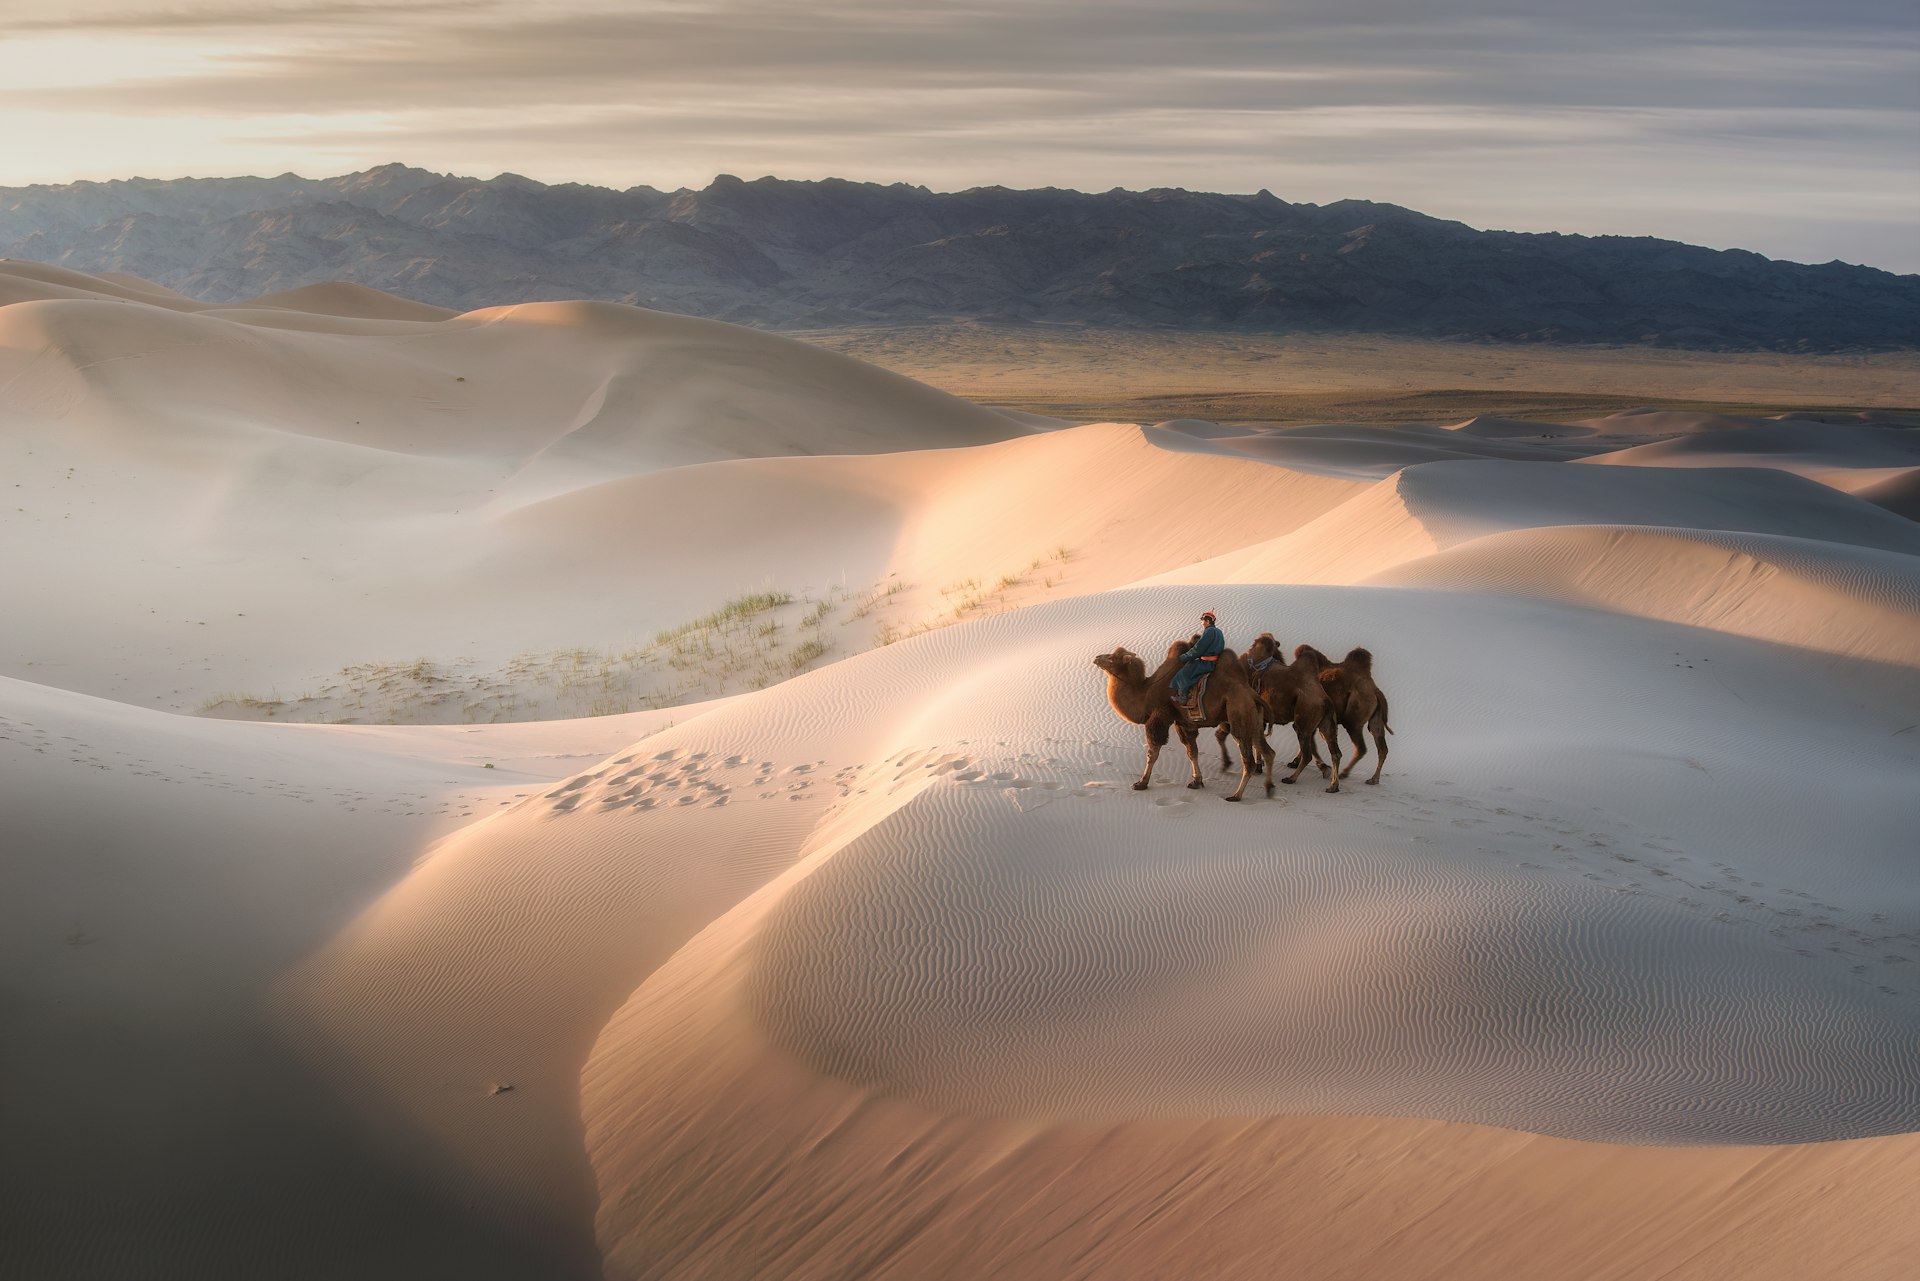 A man rides a camel over sand dunes while leading two others